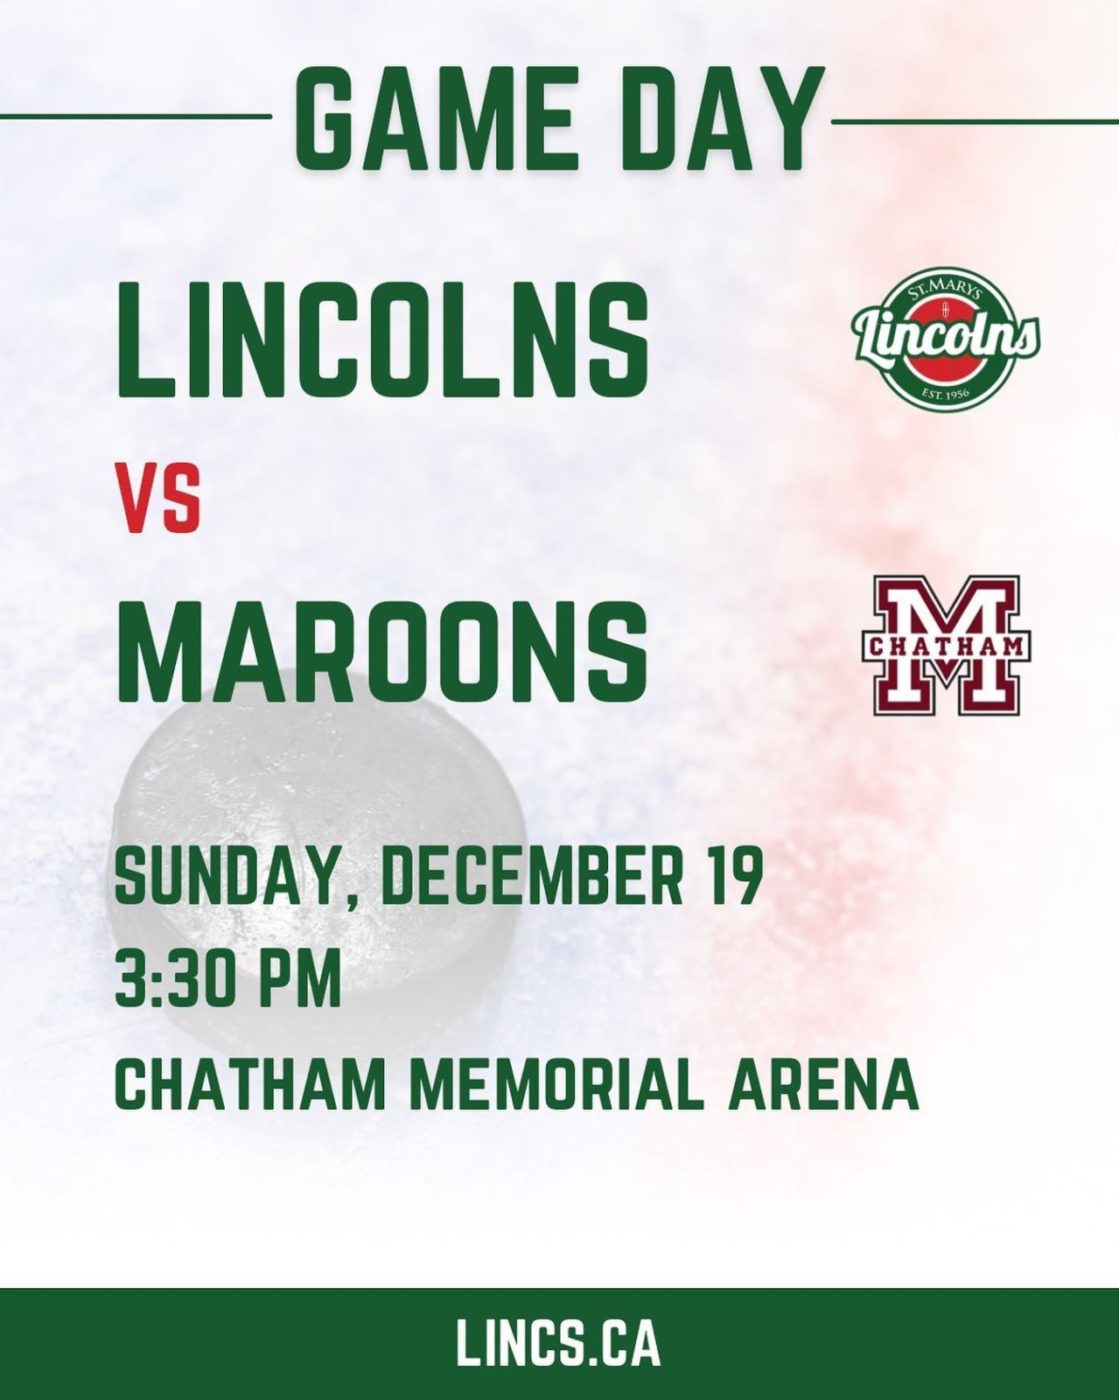 GAME DAY - Lincs head to Chatham to take on the Maroons today. As always, catch the game on St. Marys Radio!